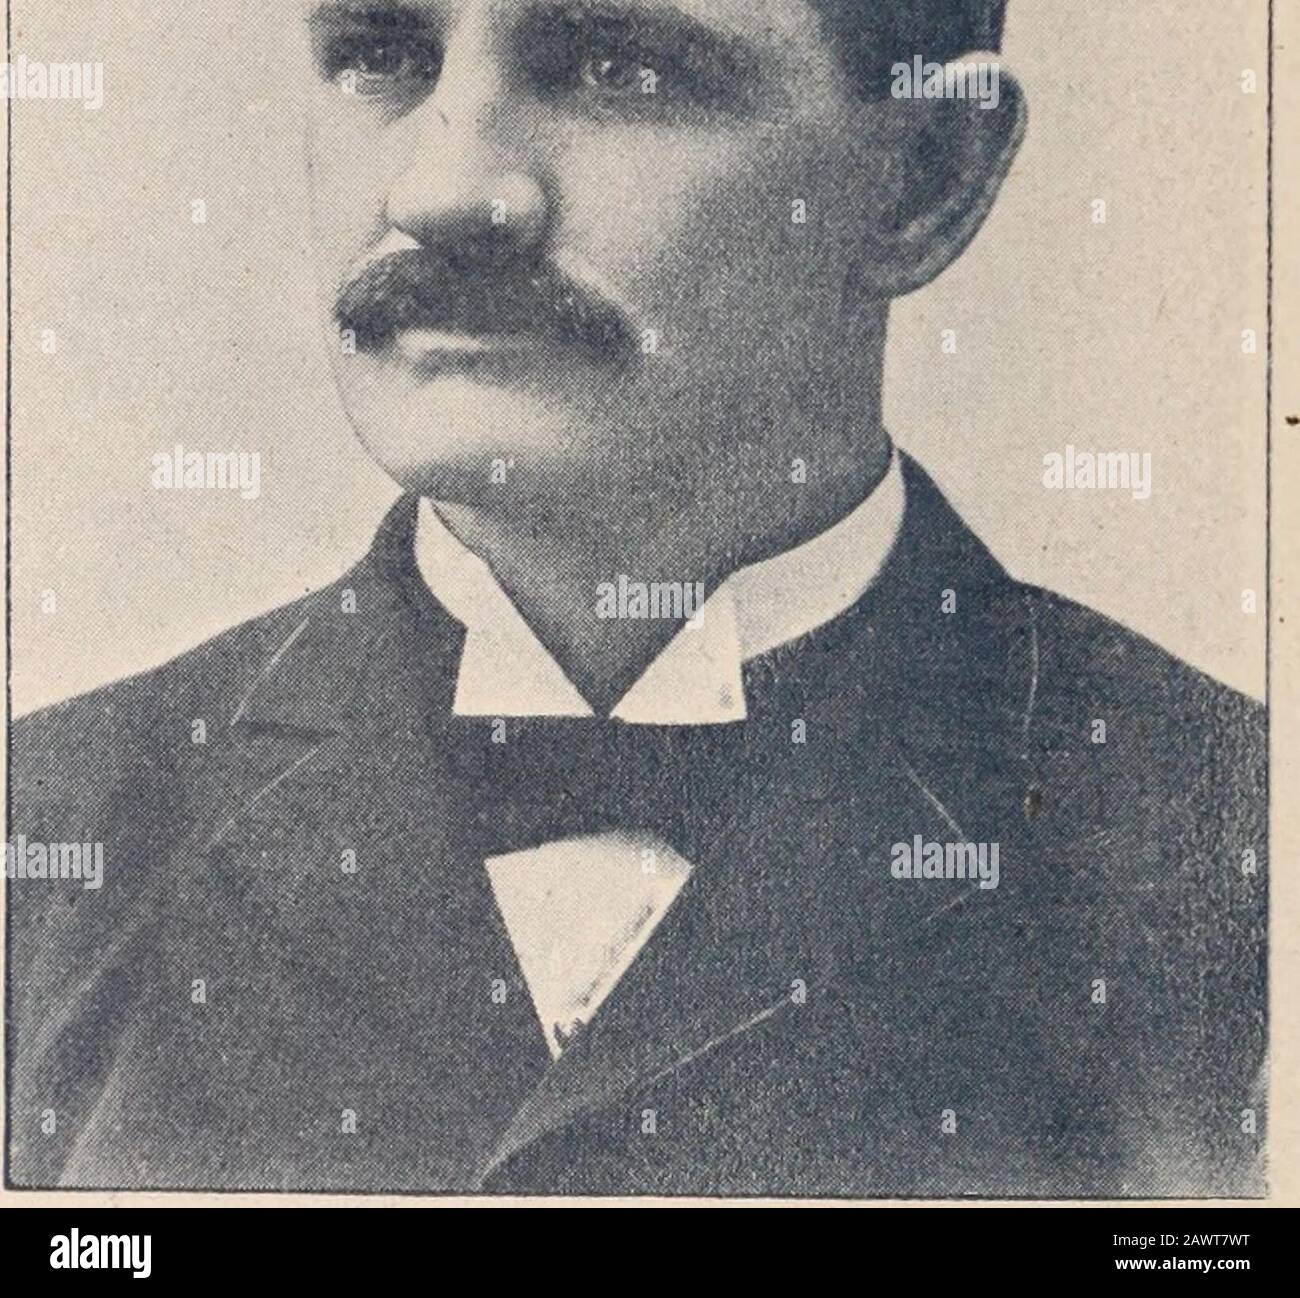 Tri-State medical journal and practitioner . Dr. Eugeiie Smith, Detroit, Michigan. 102 Original Articles. Dewey, Moville, Iowa; John A. Prince, Springfield, 111.; J. F. Percy,Galesburg, 111.; F. Reder, Hannibal, Mo., and Louis Becker, Knoxville,Illinois. Papers of the greatest value were read at this meeting. Among the bestwere the following: A New and Improved Method of Removing theUterus, by Emory L,anphear; Impetigo Contagiosa, by Louis Becker;The Rubber Bulb as an Aid in Intestinal Surgery, by F. Reder; Pros-titution; Its Cause, and the Relation of the Medical Profession to Its Abol-ishmen Stock Photo